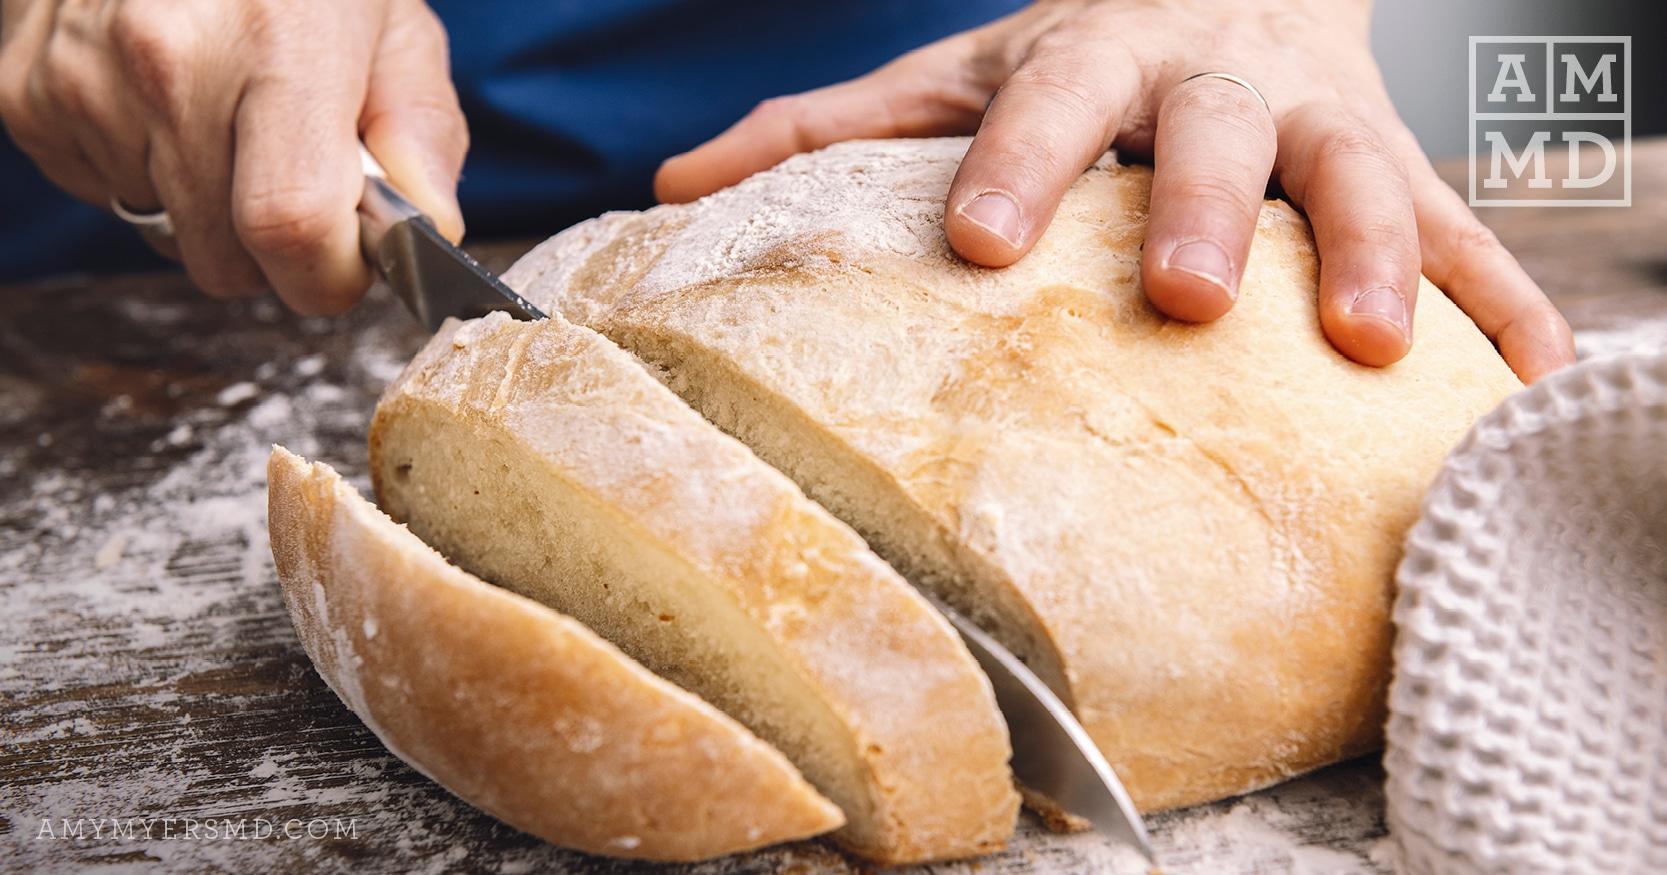 The Benefits of Going Gluten-free With Autoimmune Disease